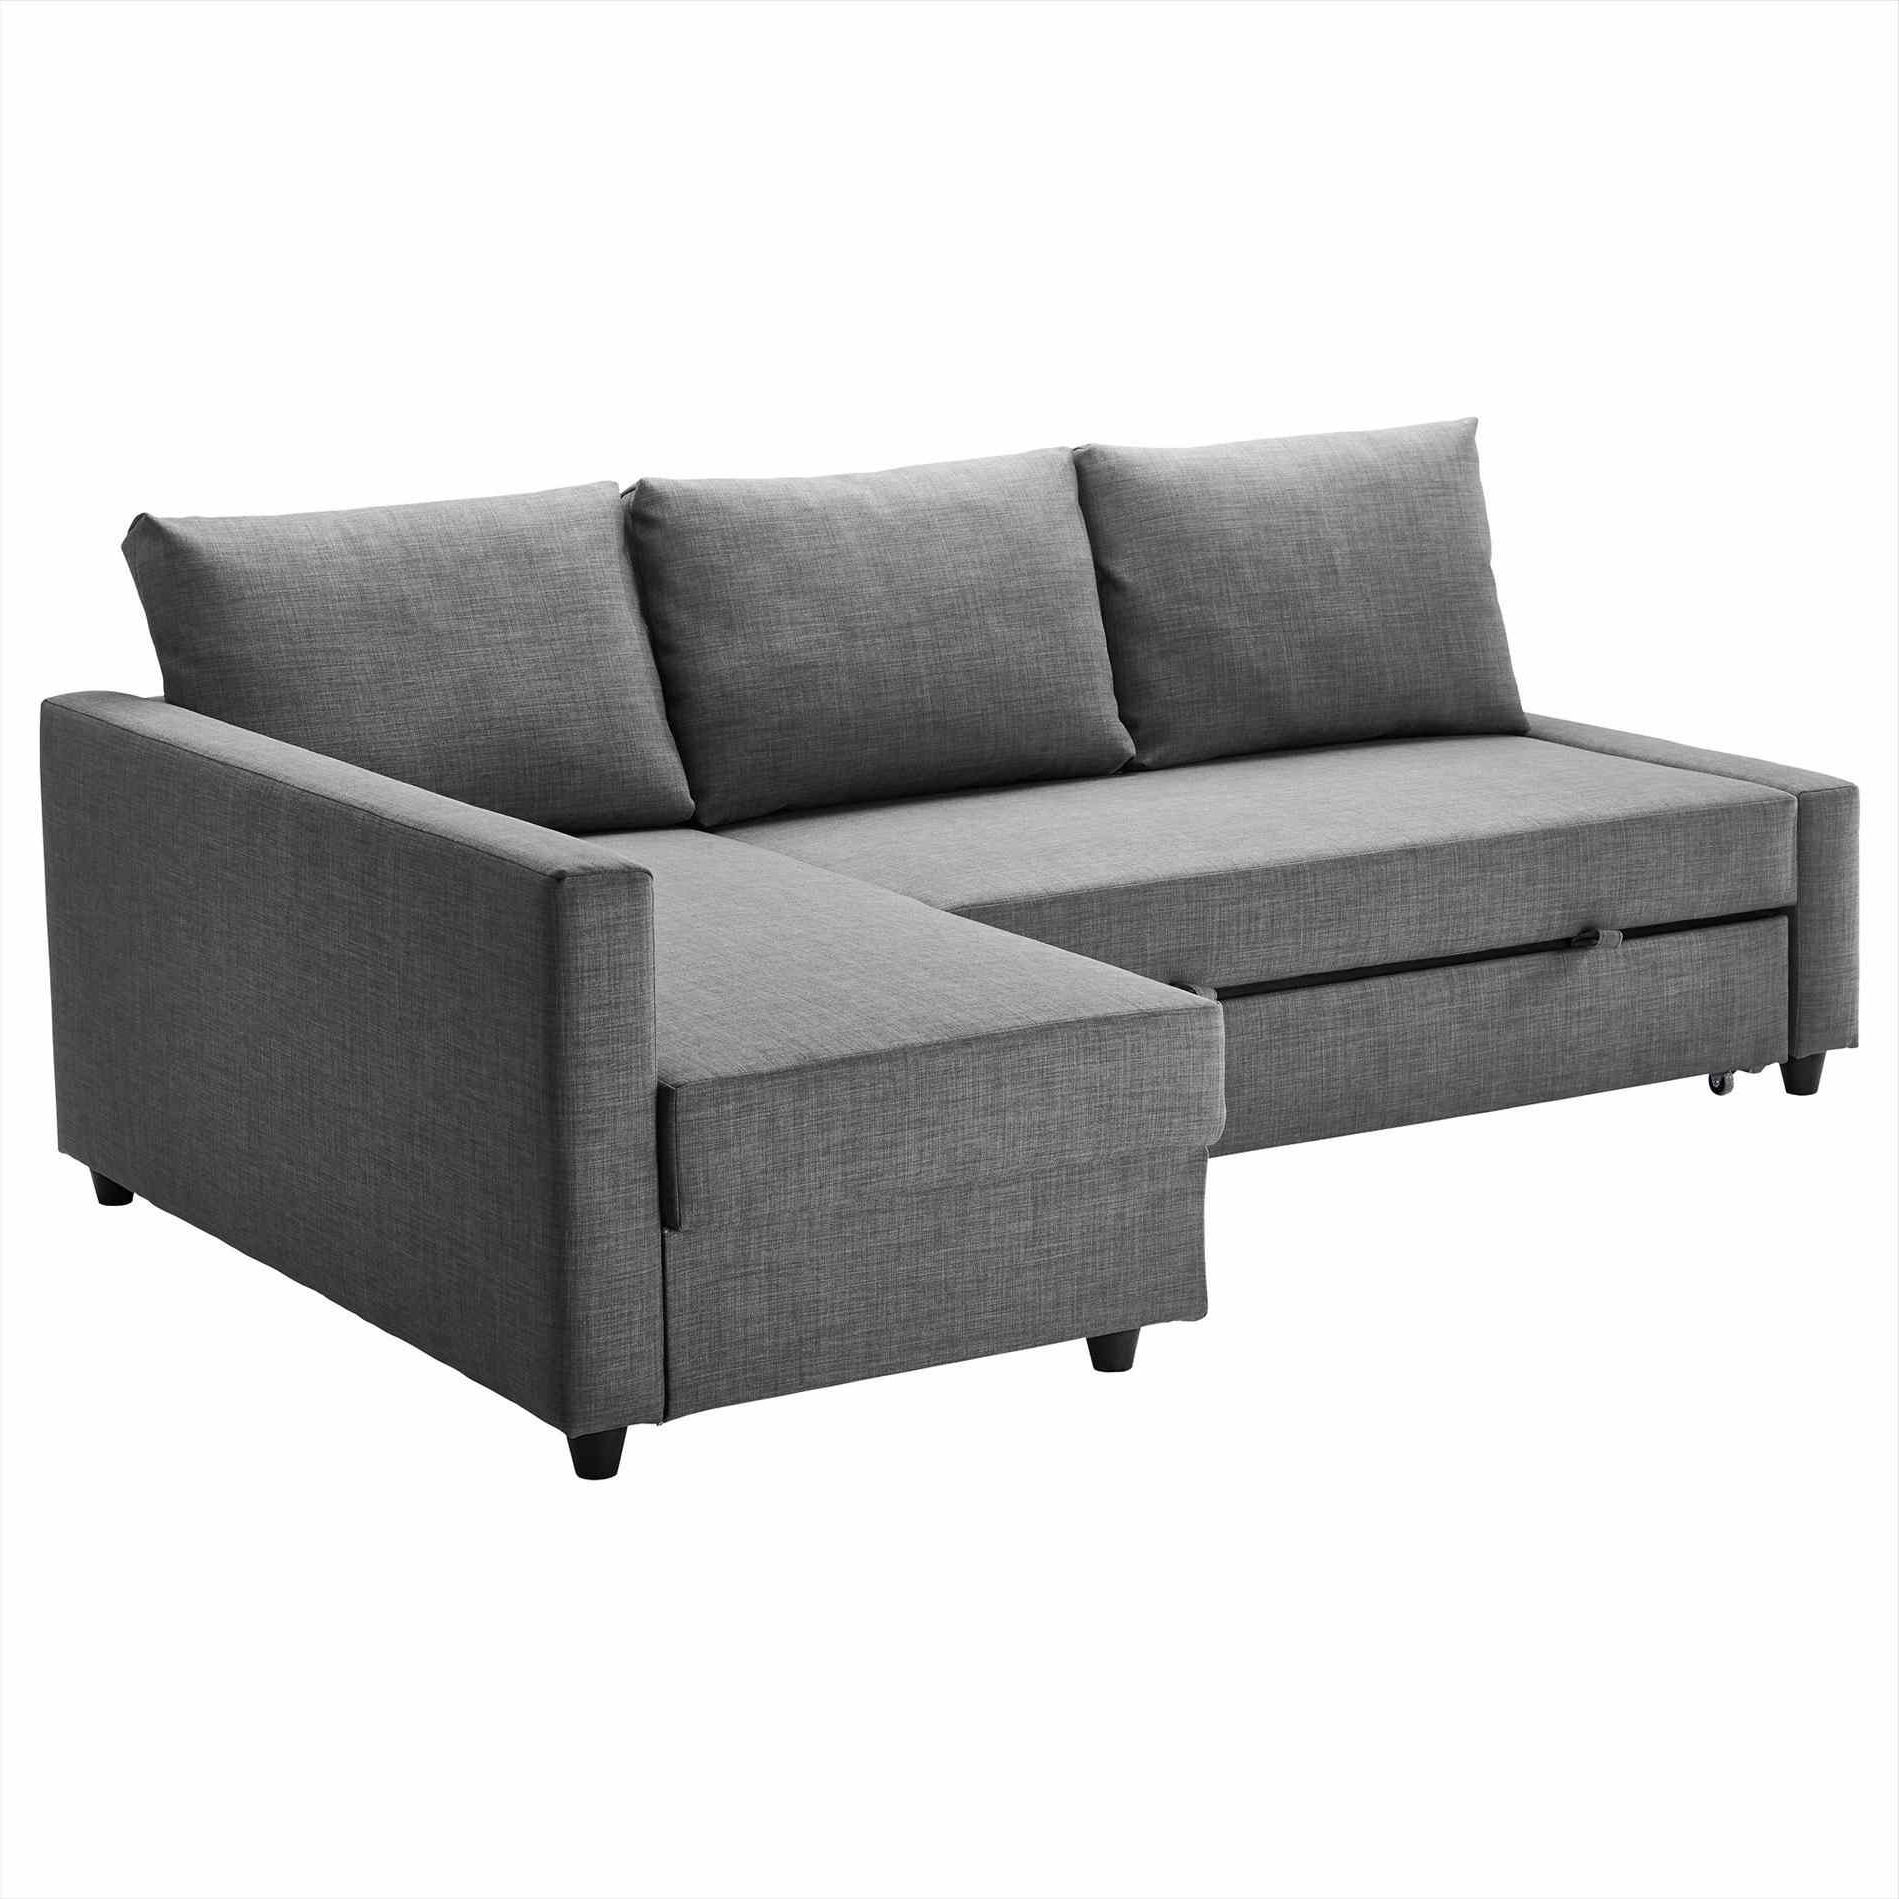 Small Chaise Sofas Within Most Recent Sofas : Small Chaise Sofa Sofas For Small Spaces‚ Sectional Sofas (View 9 of 15)